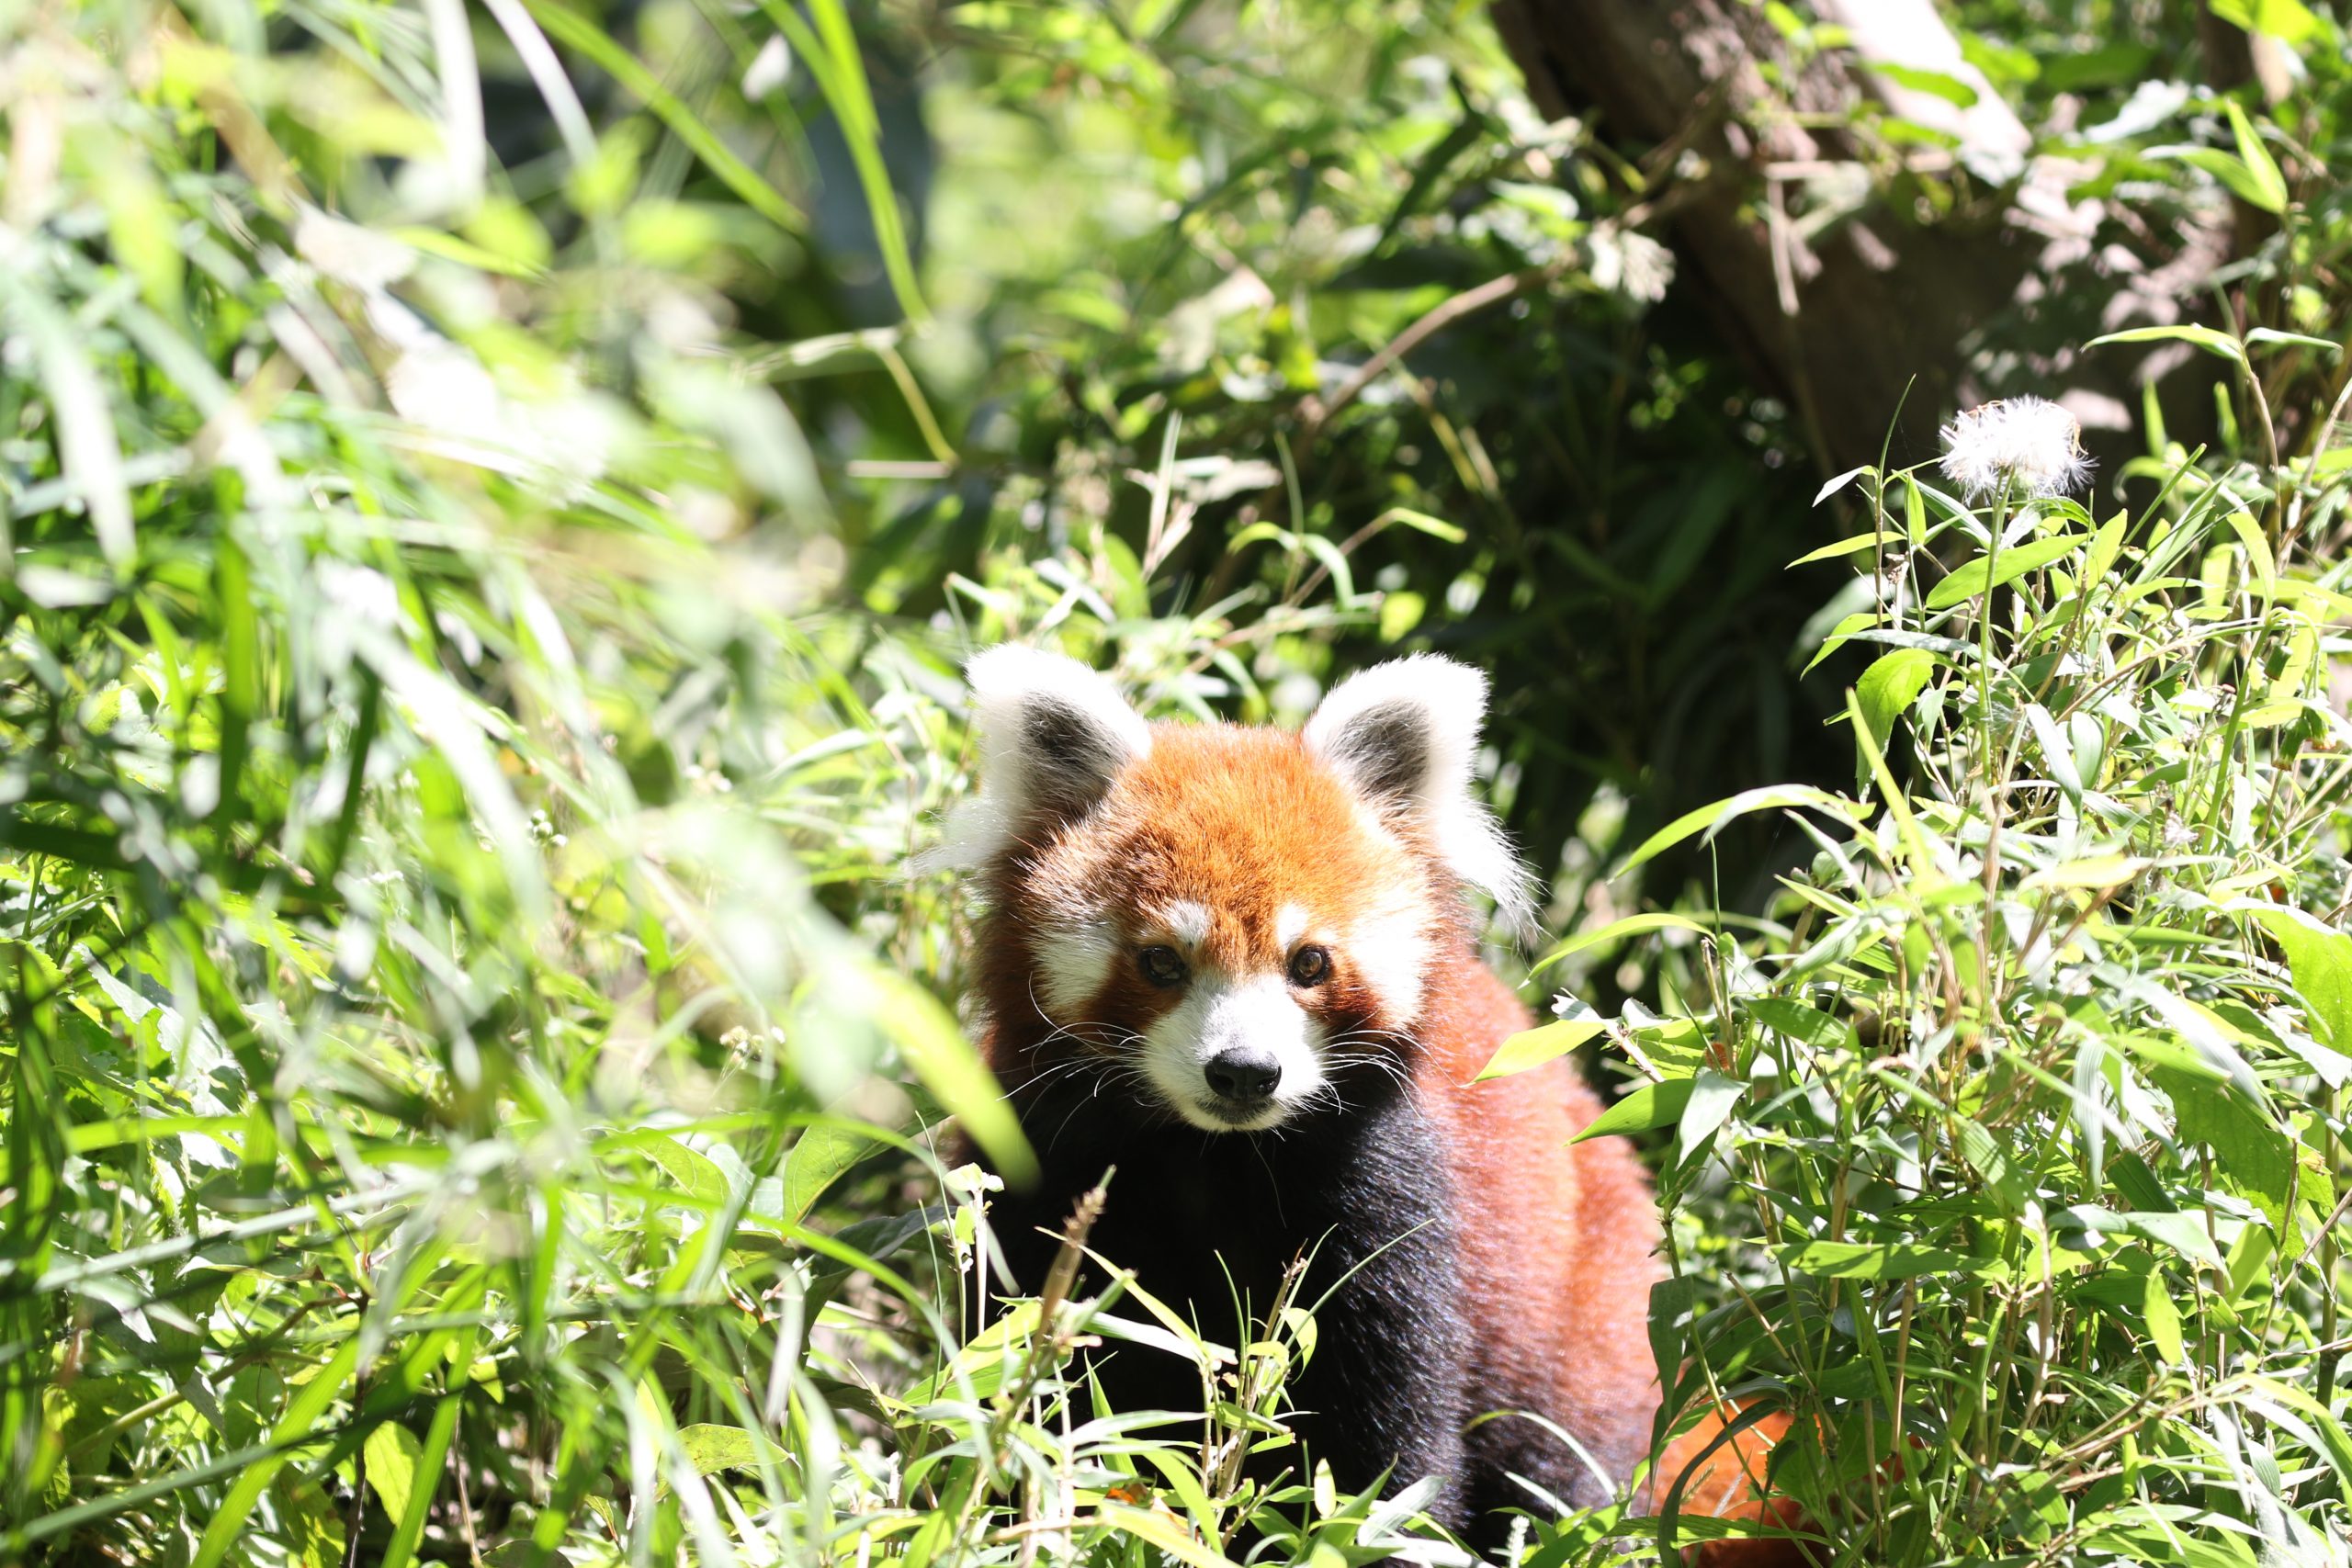 Traditional knowledge and customary sustainable practices to conserve the endangered red panda in Ilam, Nepal